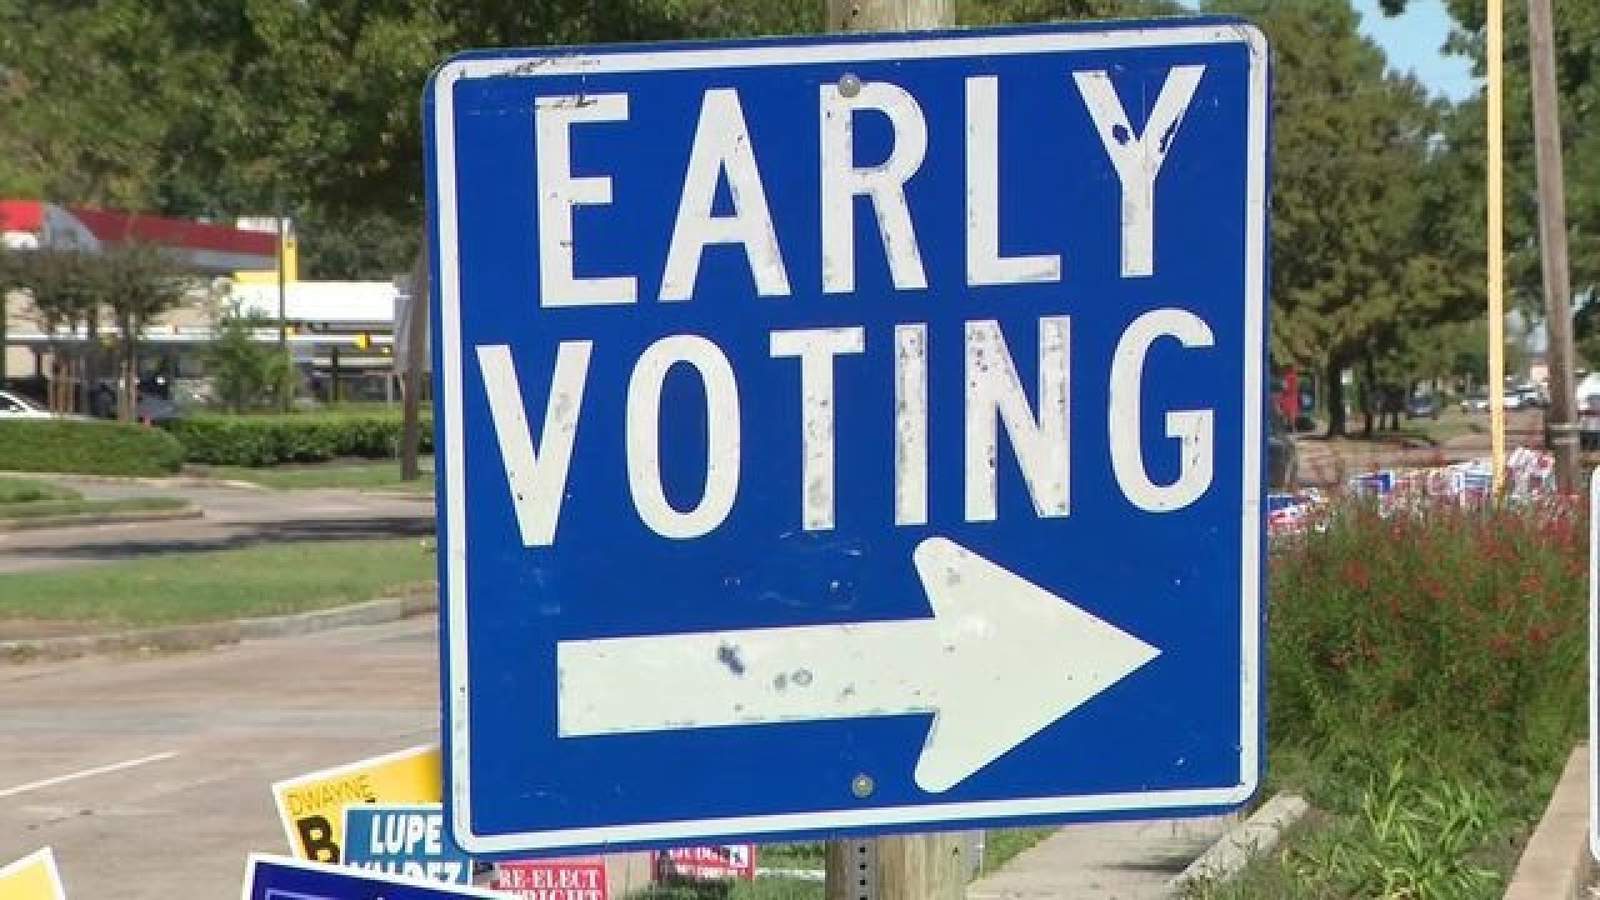 LIST: Harris County polling places are open until 7 pm on last day of early voting